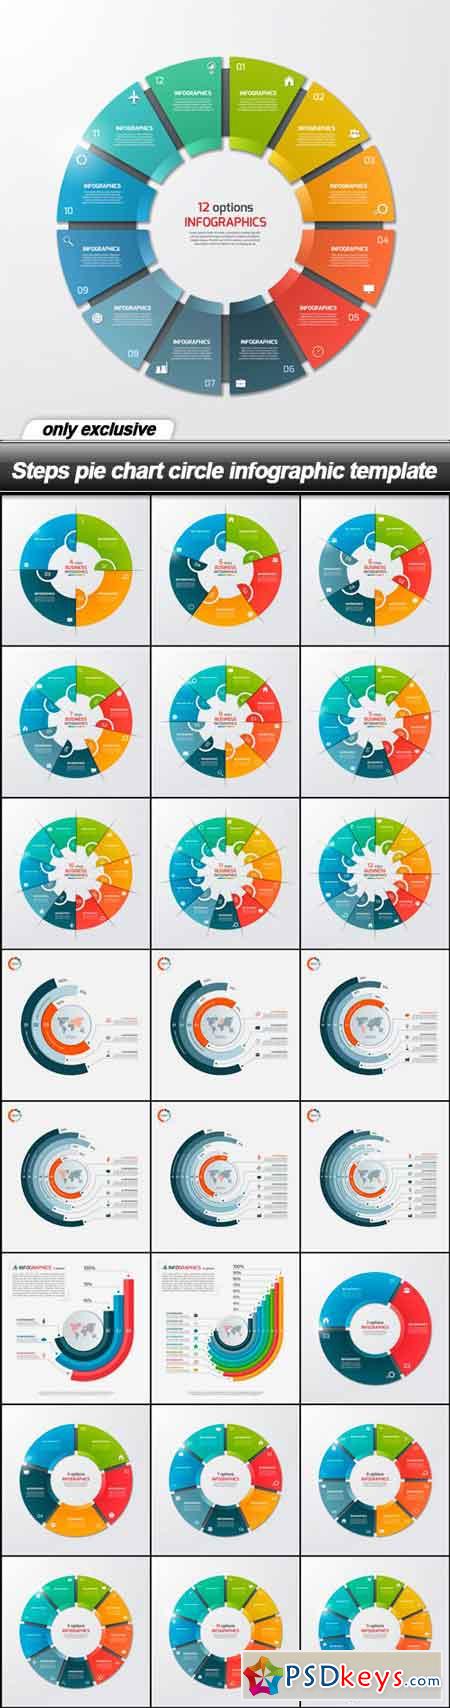 Steps pie chart circle infographic template - 25 EPS